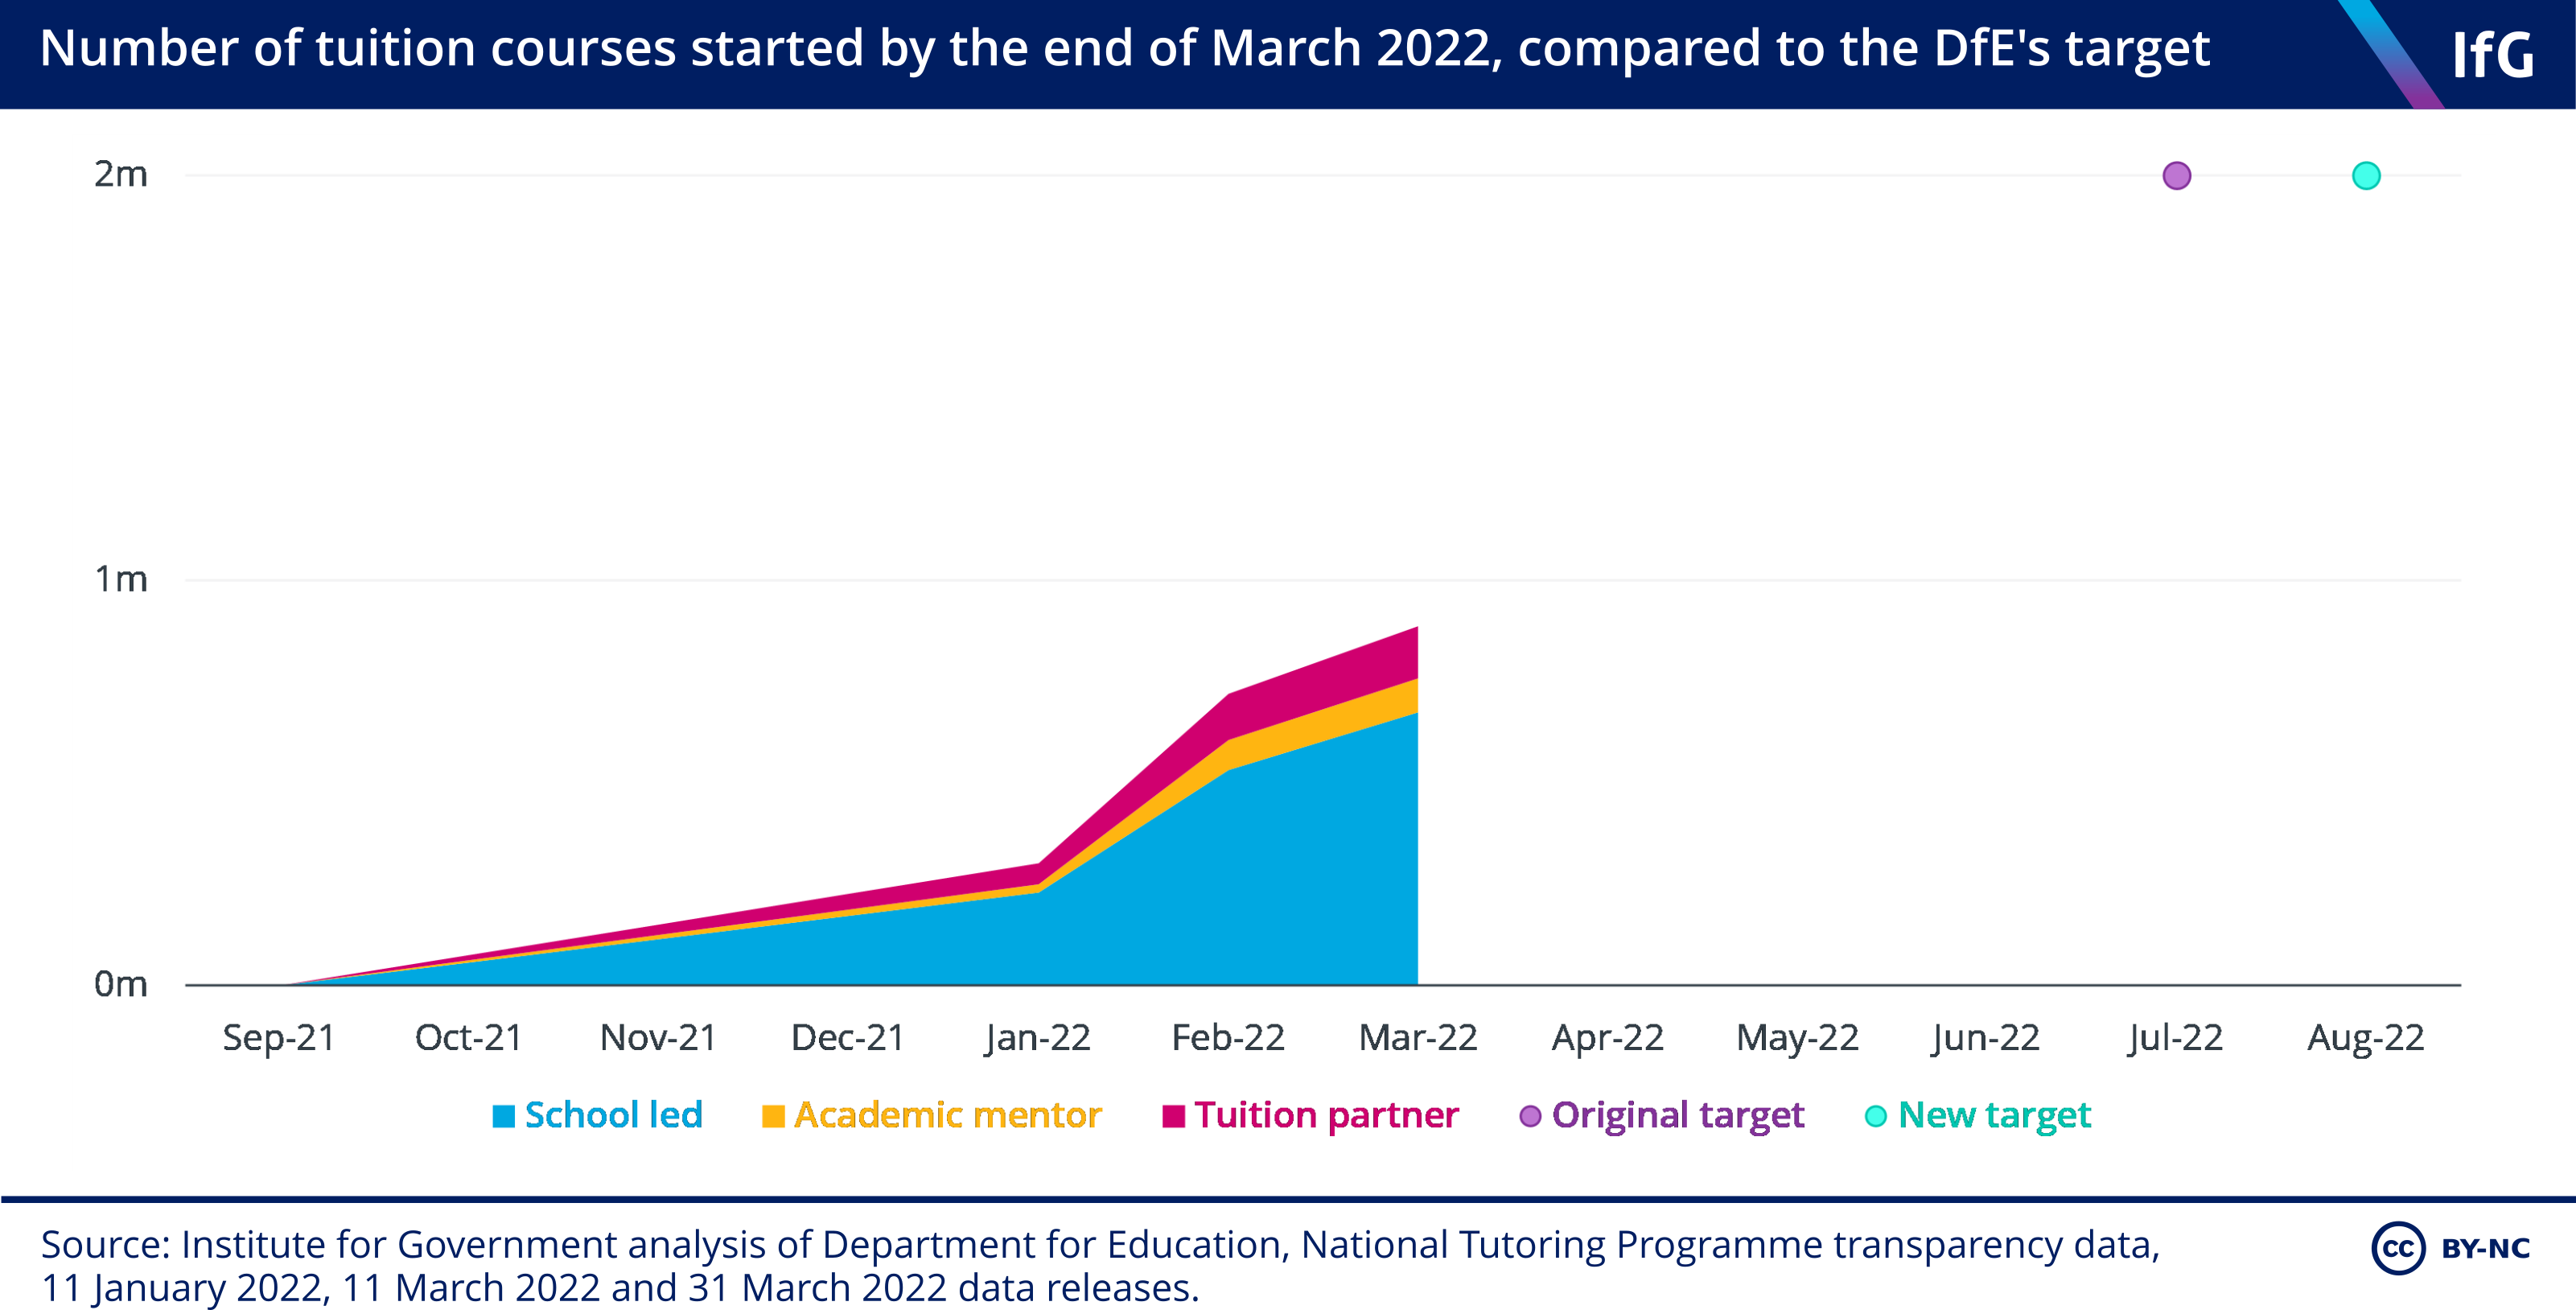 Number of tuition courses started by the end of March 2022, compared to the DfE's target